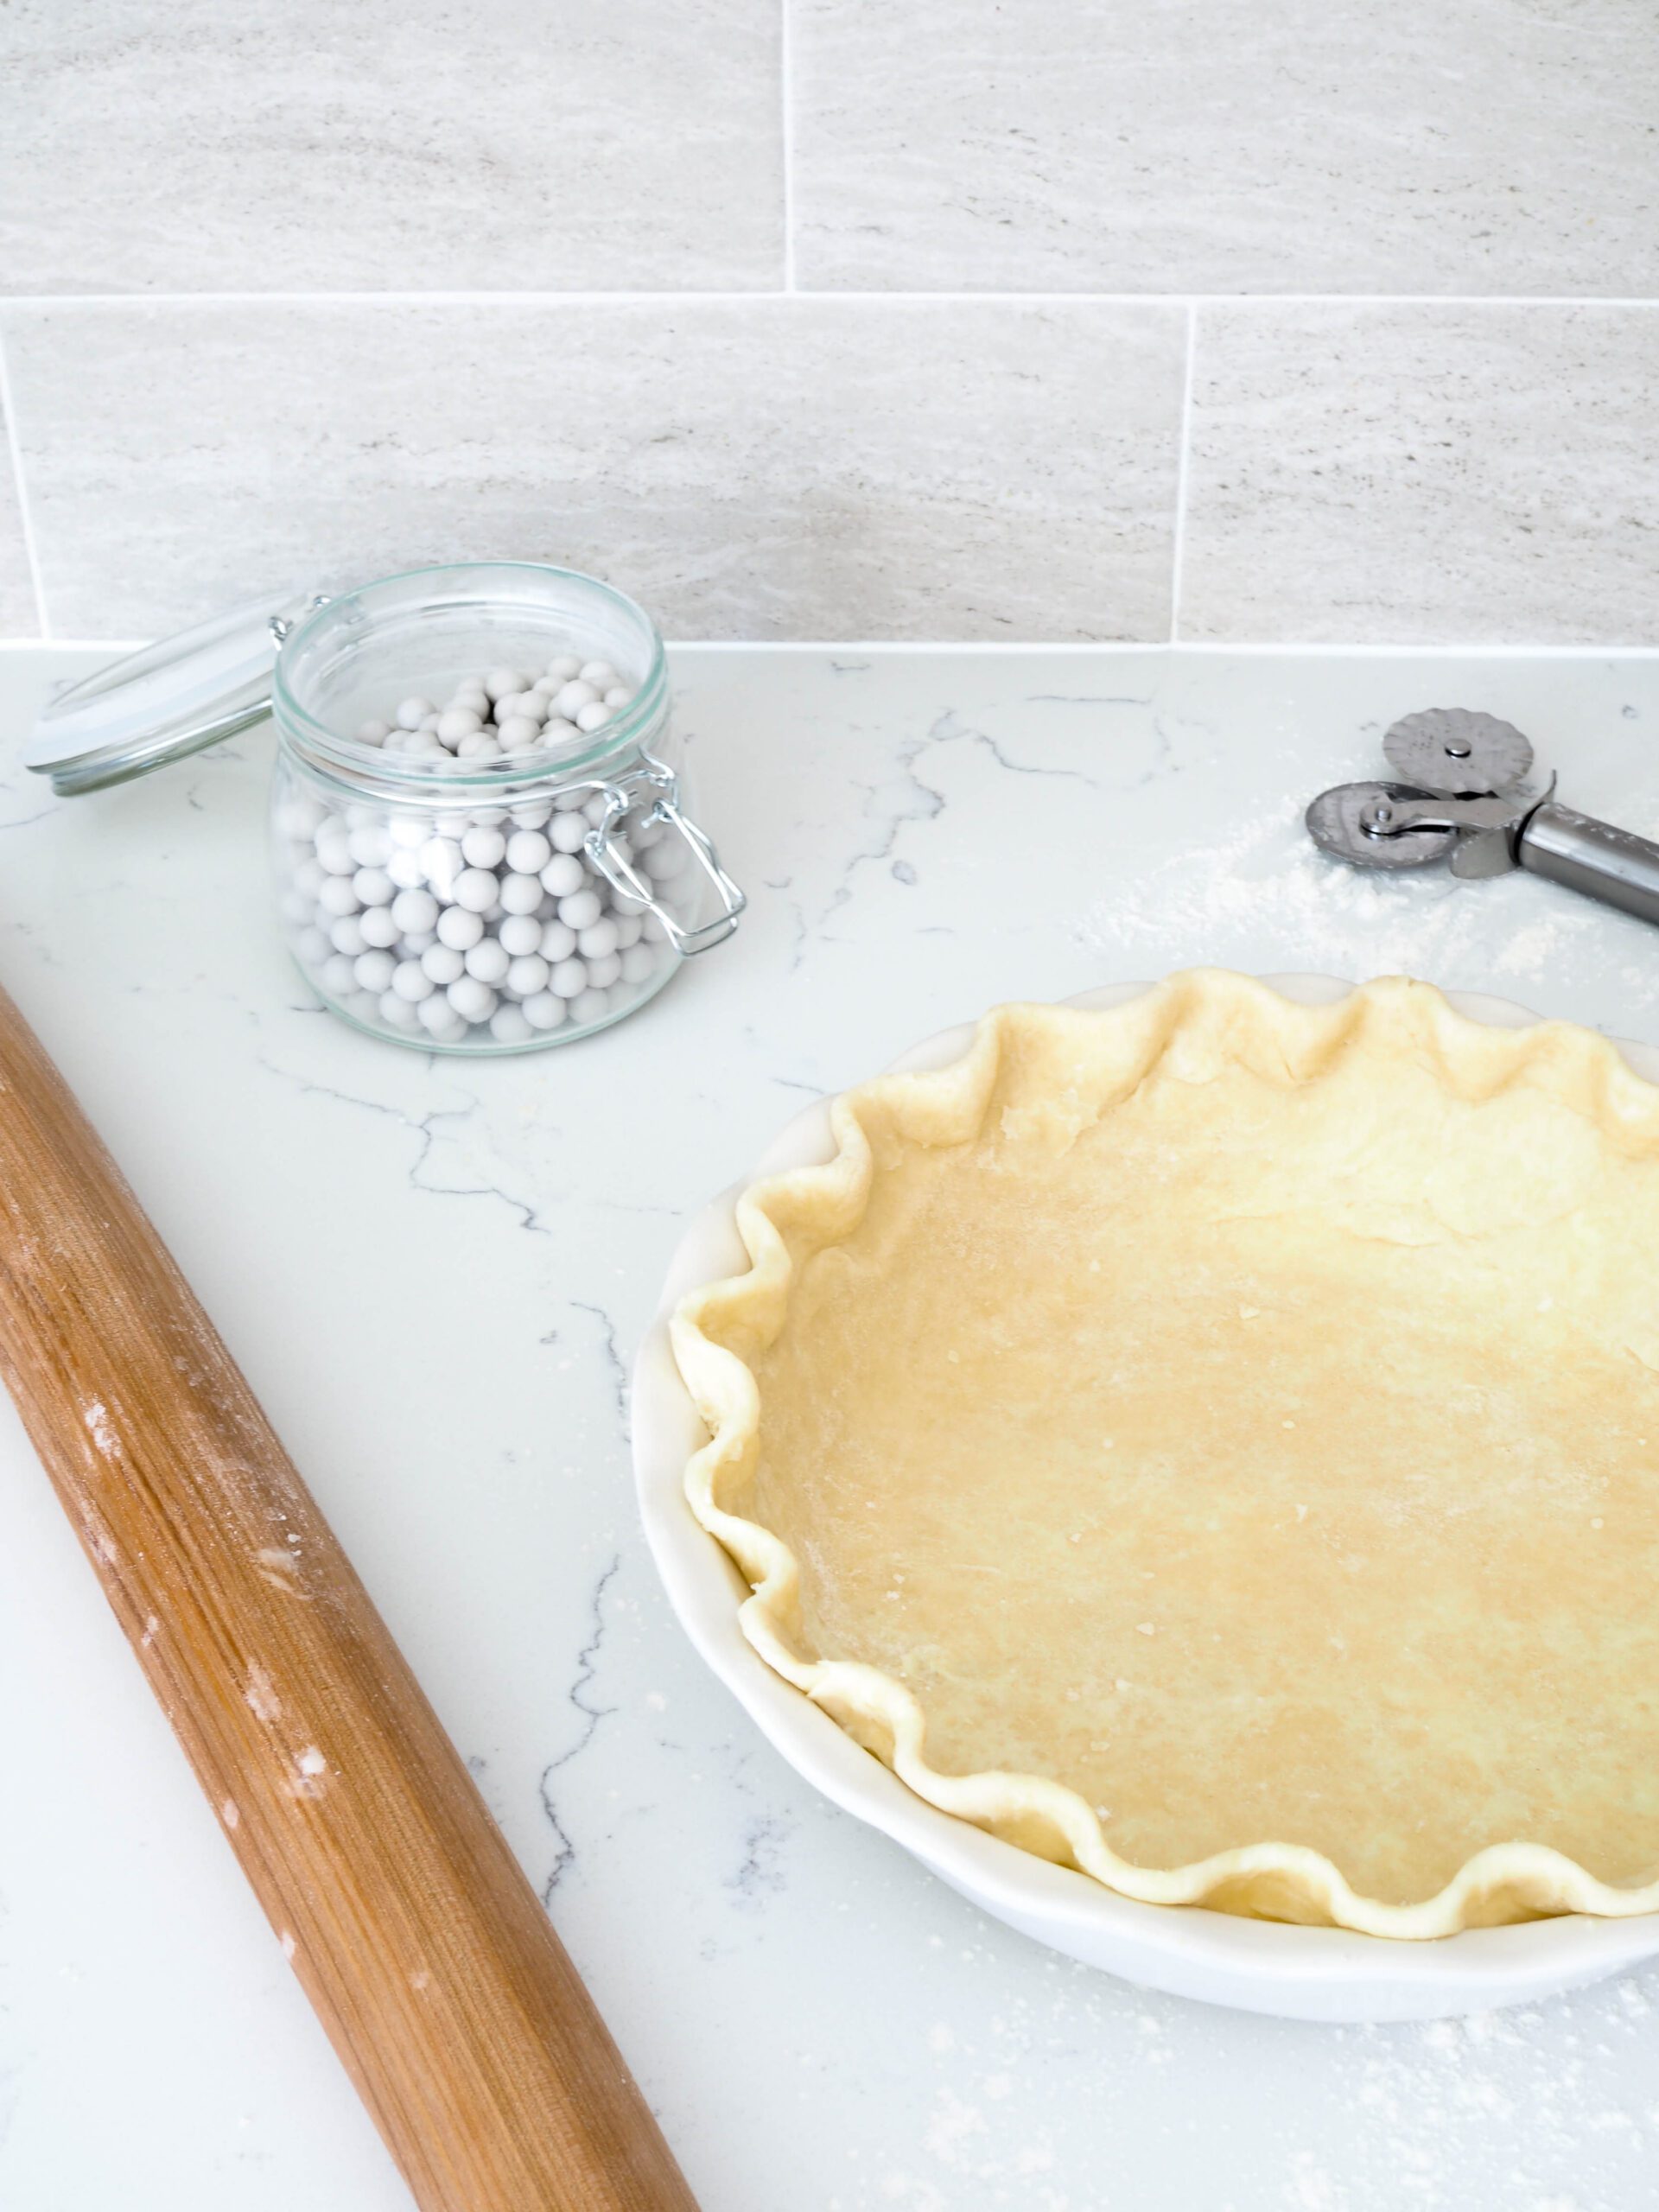 Two-thirds of a pie crust is in view in front of a gray backsplash with ceramic pie weights, a rolling pin, and a pie cutting tool.